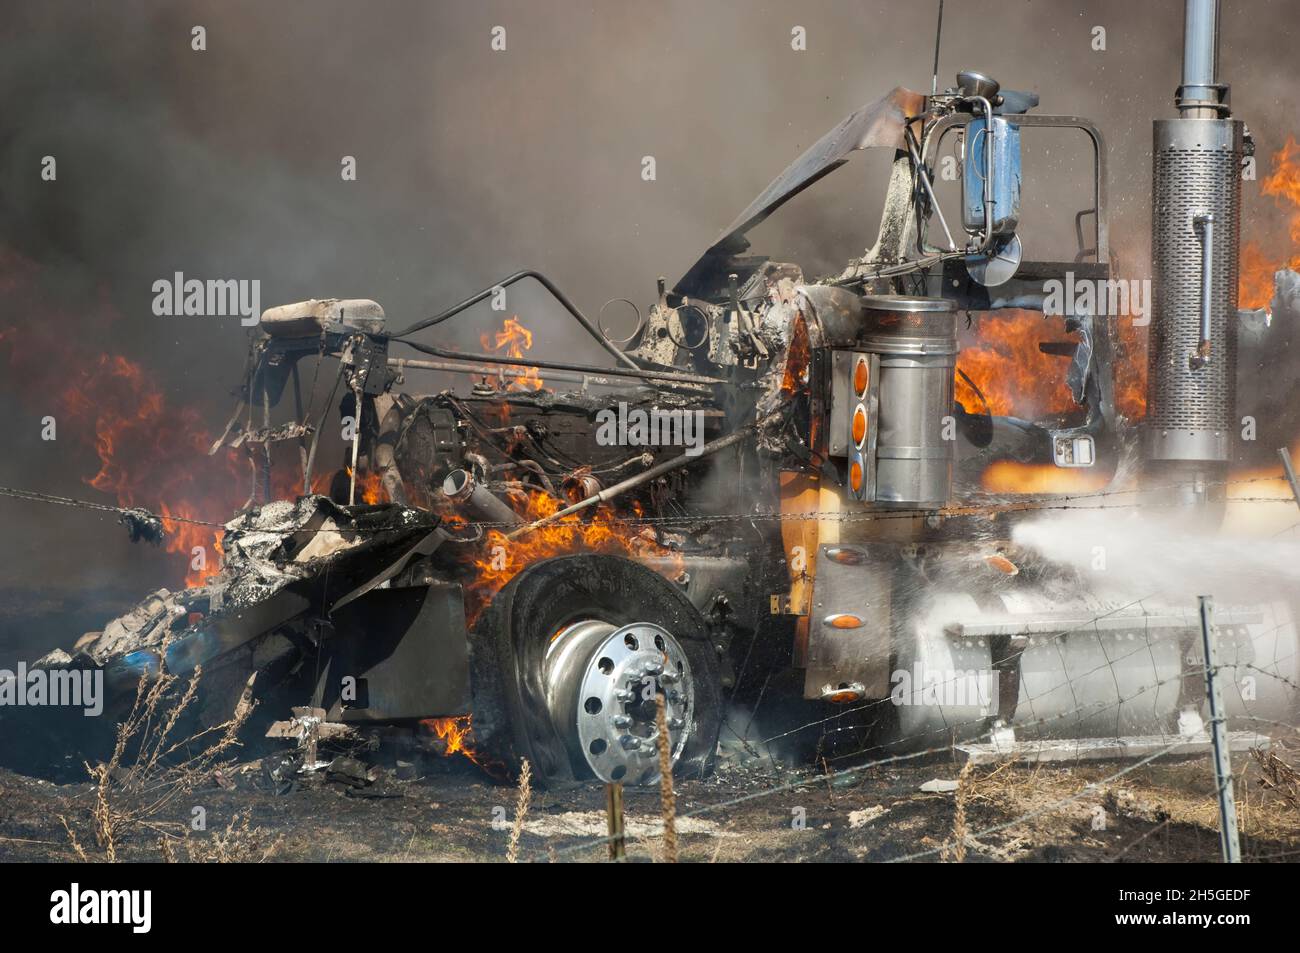 Close-up of a tractor-trailer truck on fire after an automobile accident; United States of America Stock Photo